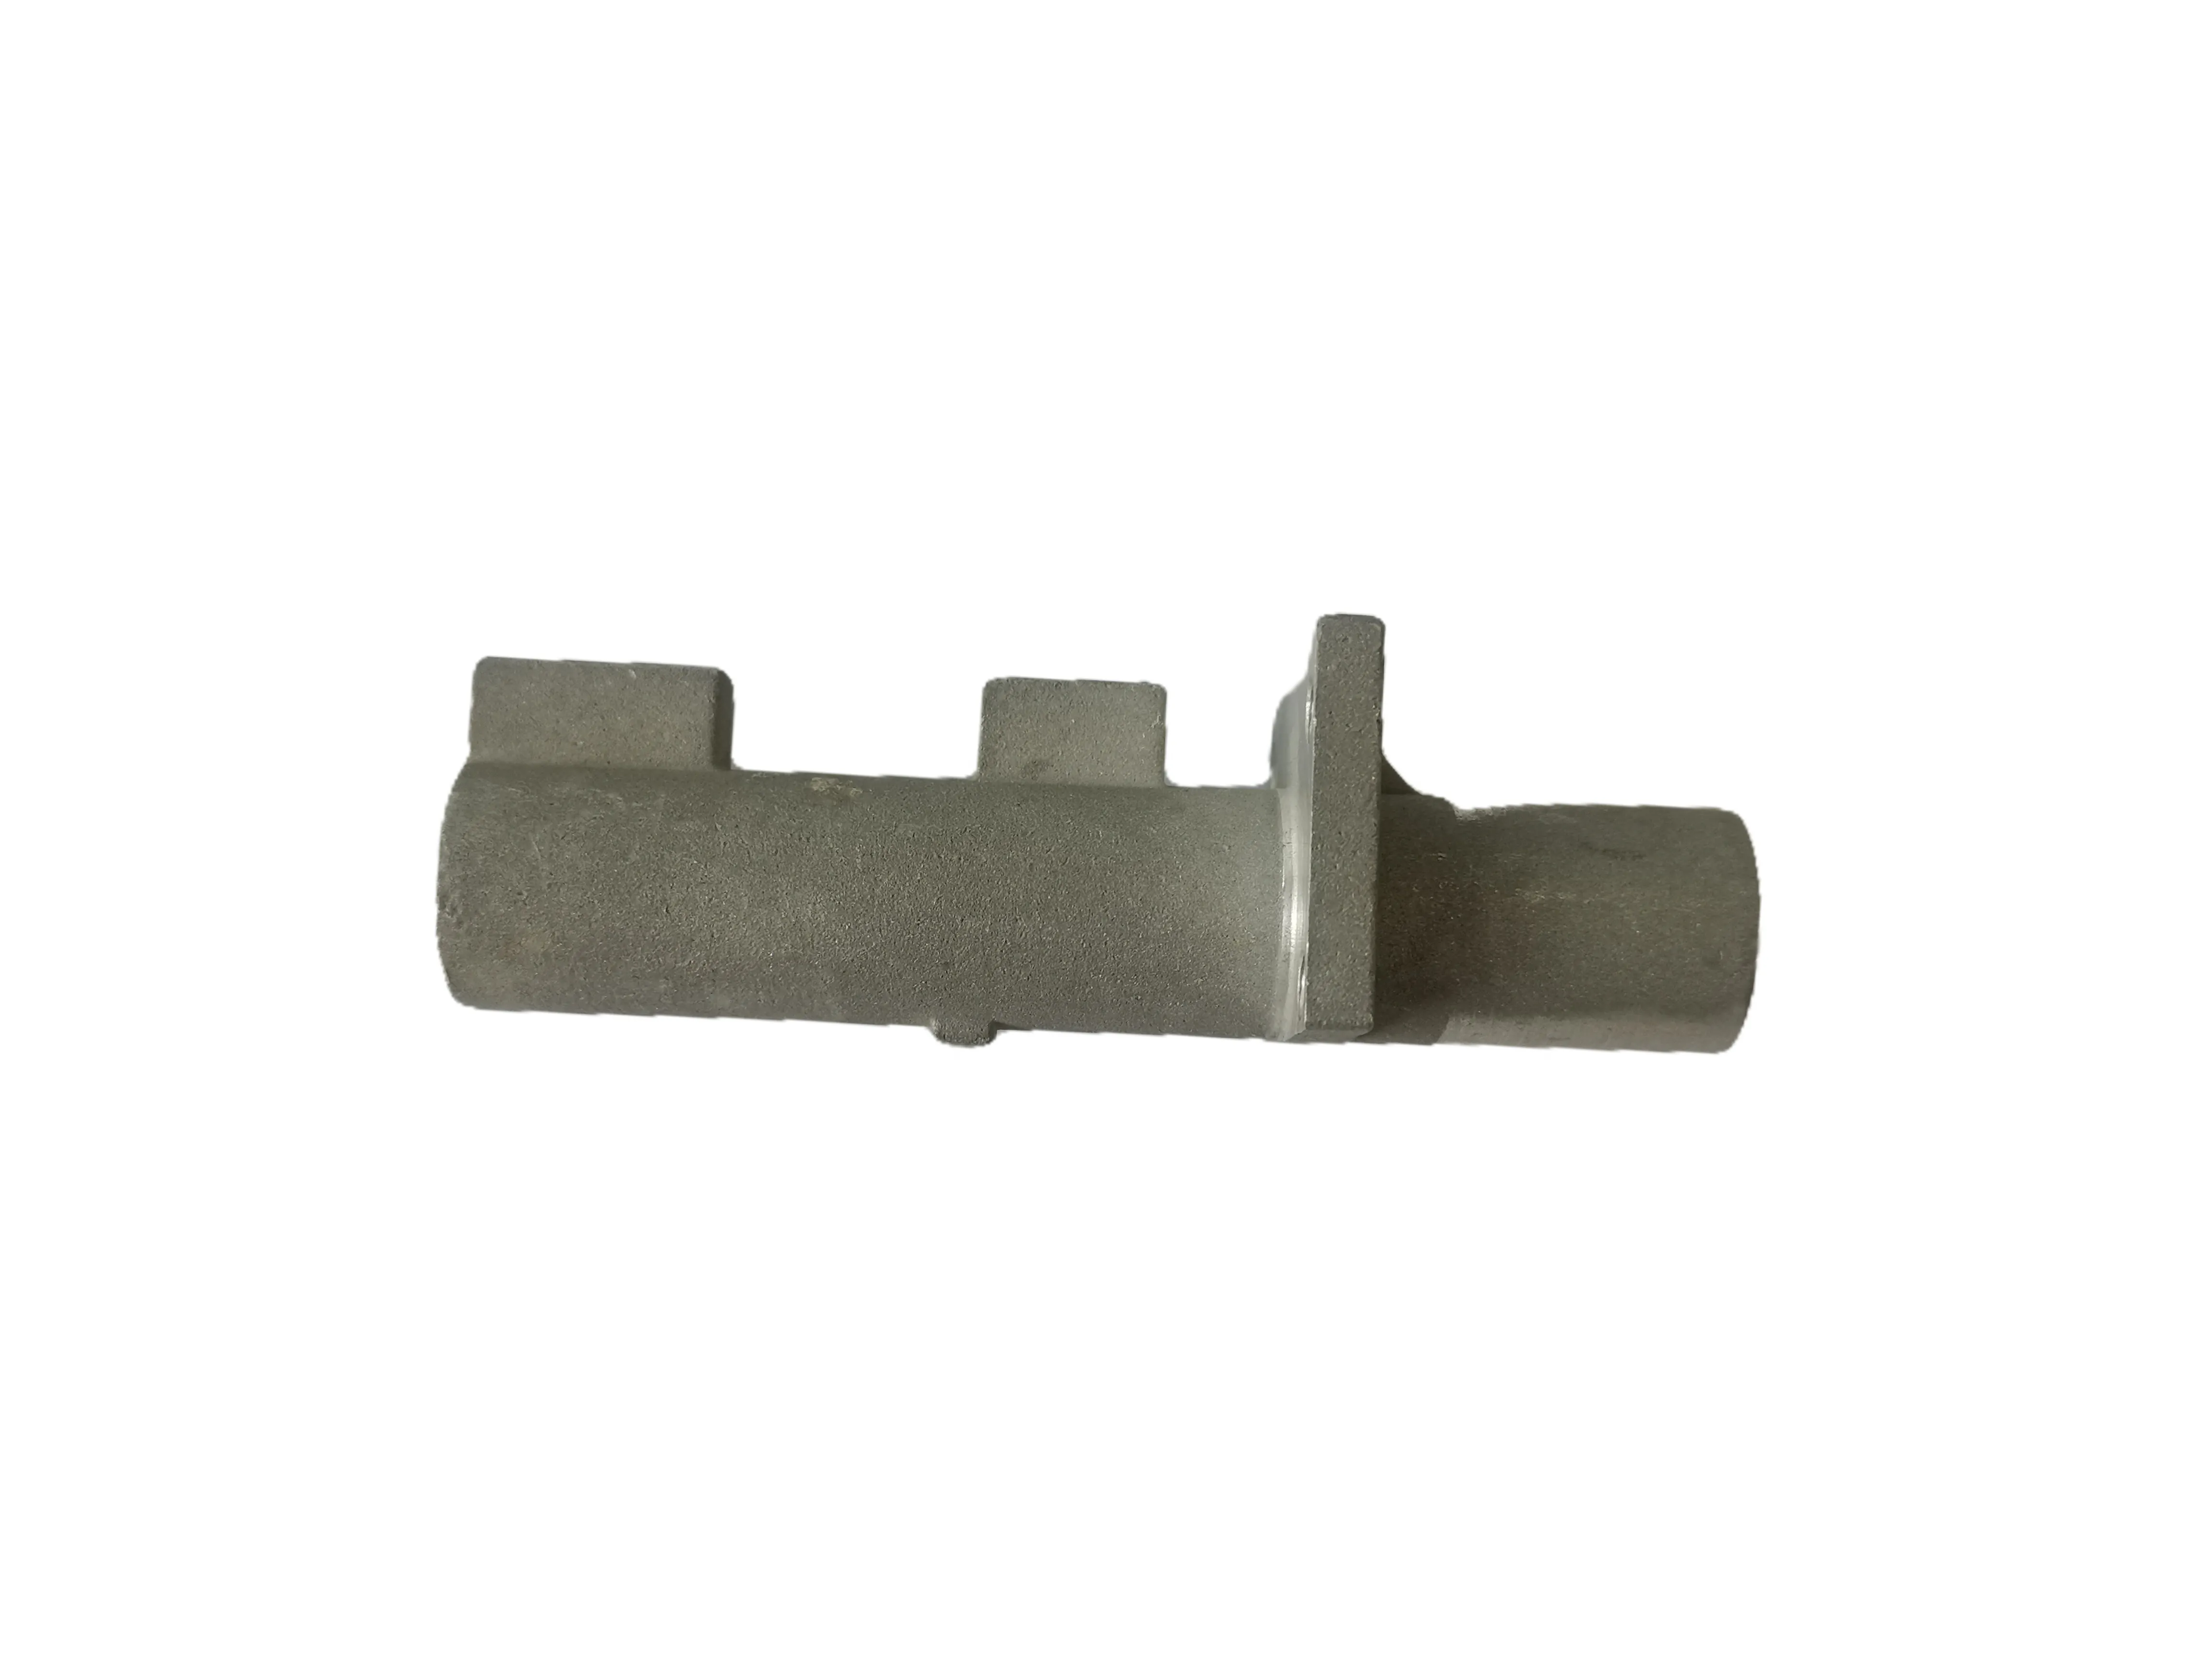 Low Price And Good Quality Precision Cast Aluminum Quality Zl101 Industrial Supplies